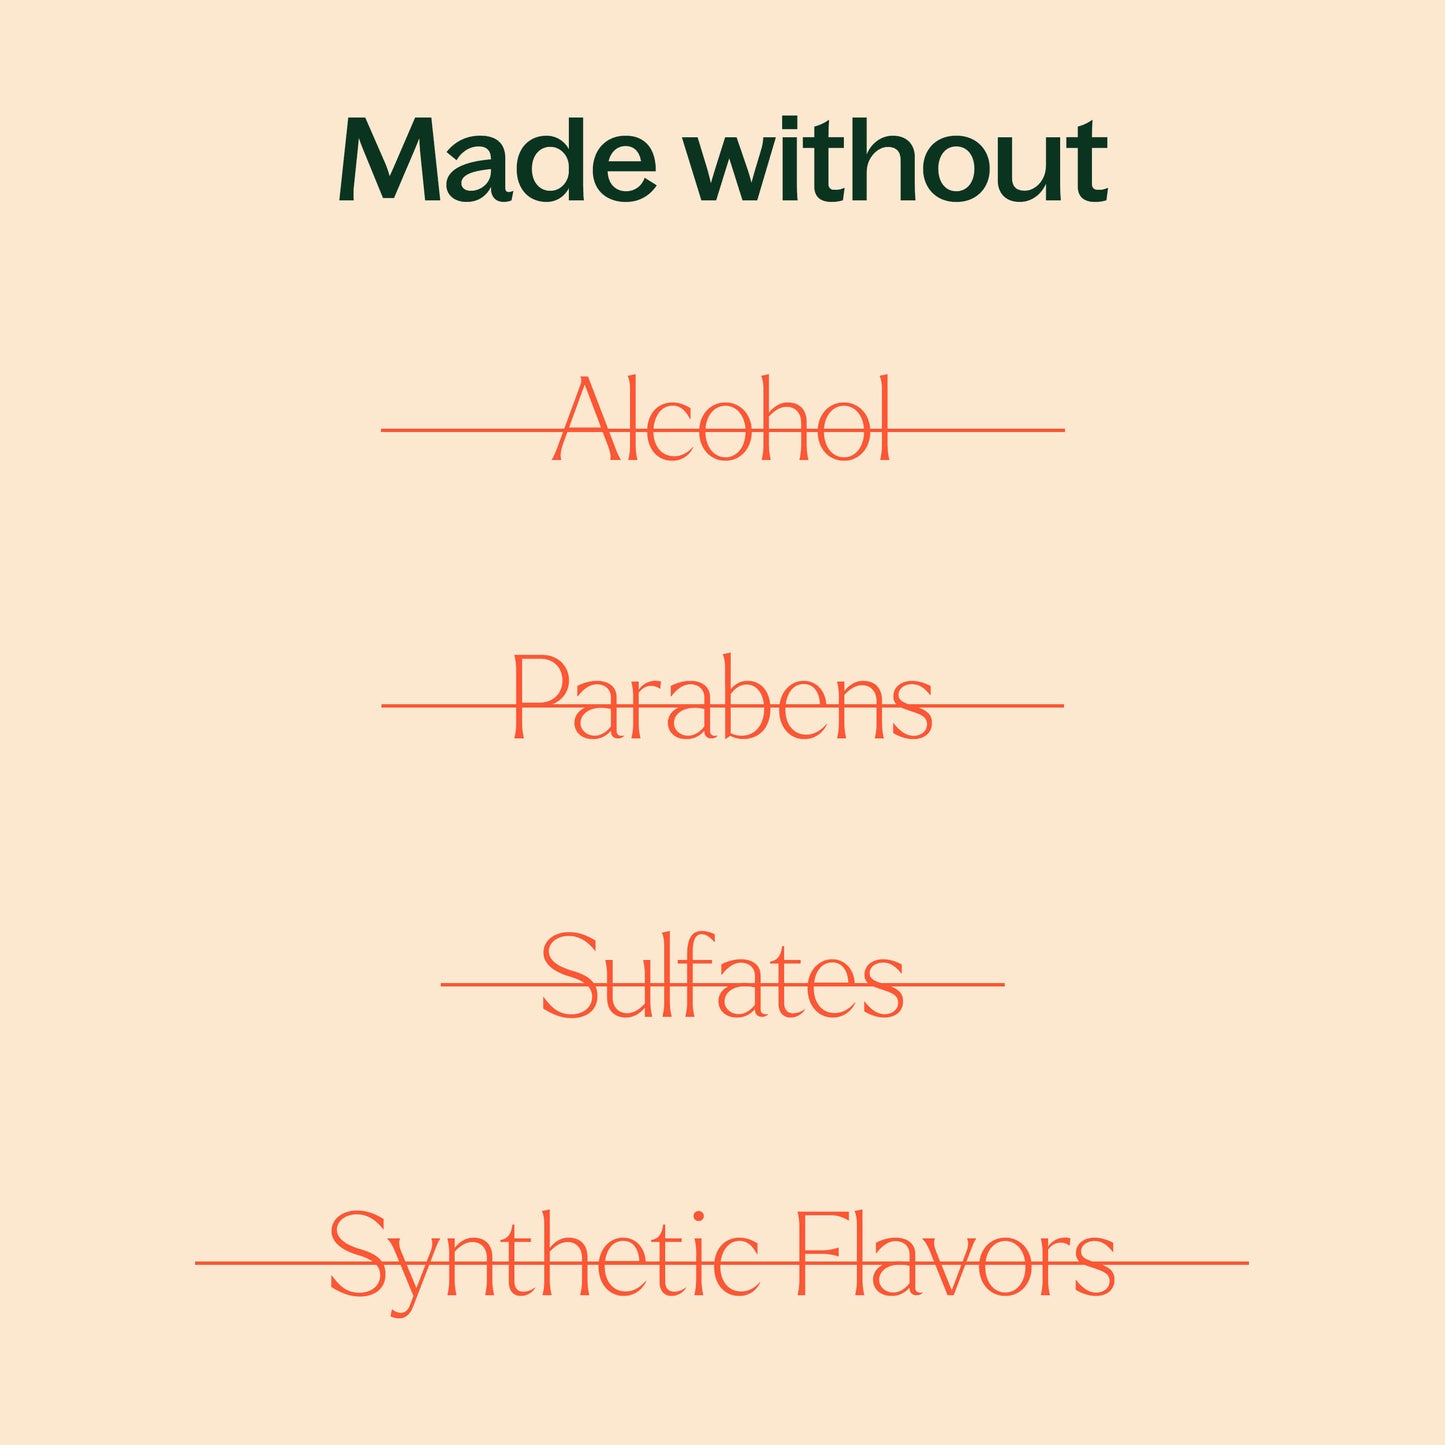 made without alcohol, parabens, sulfates, synthetic fragrances